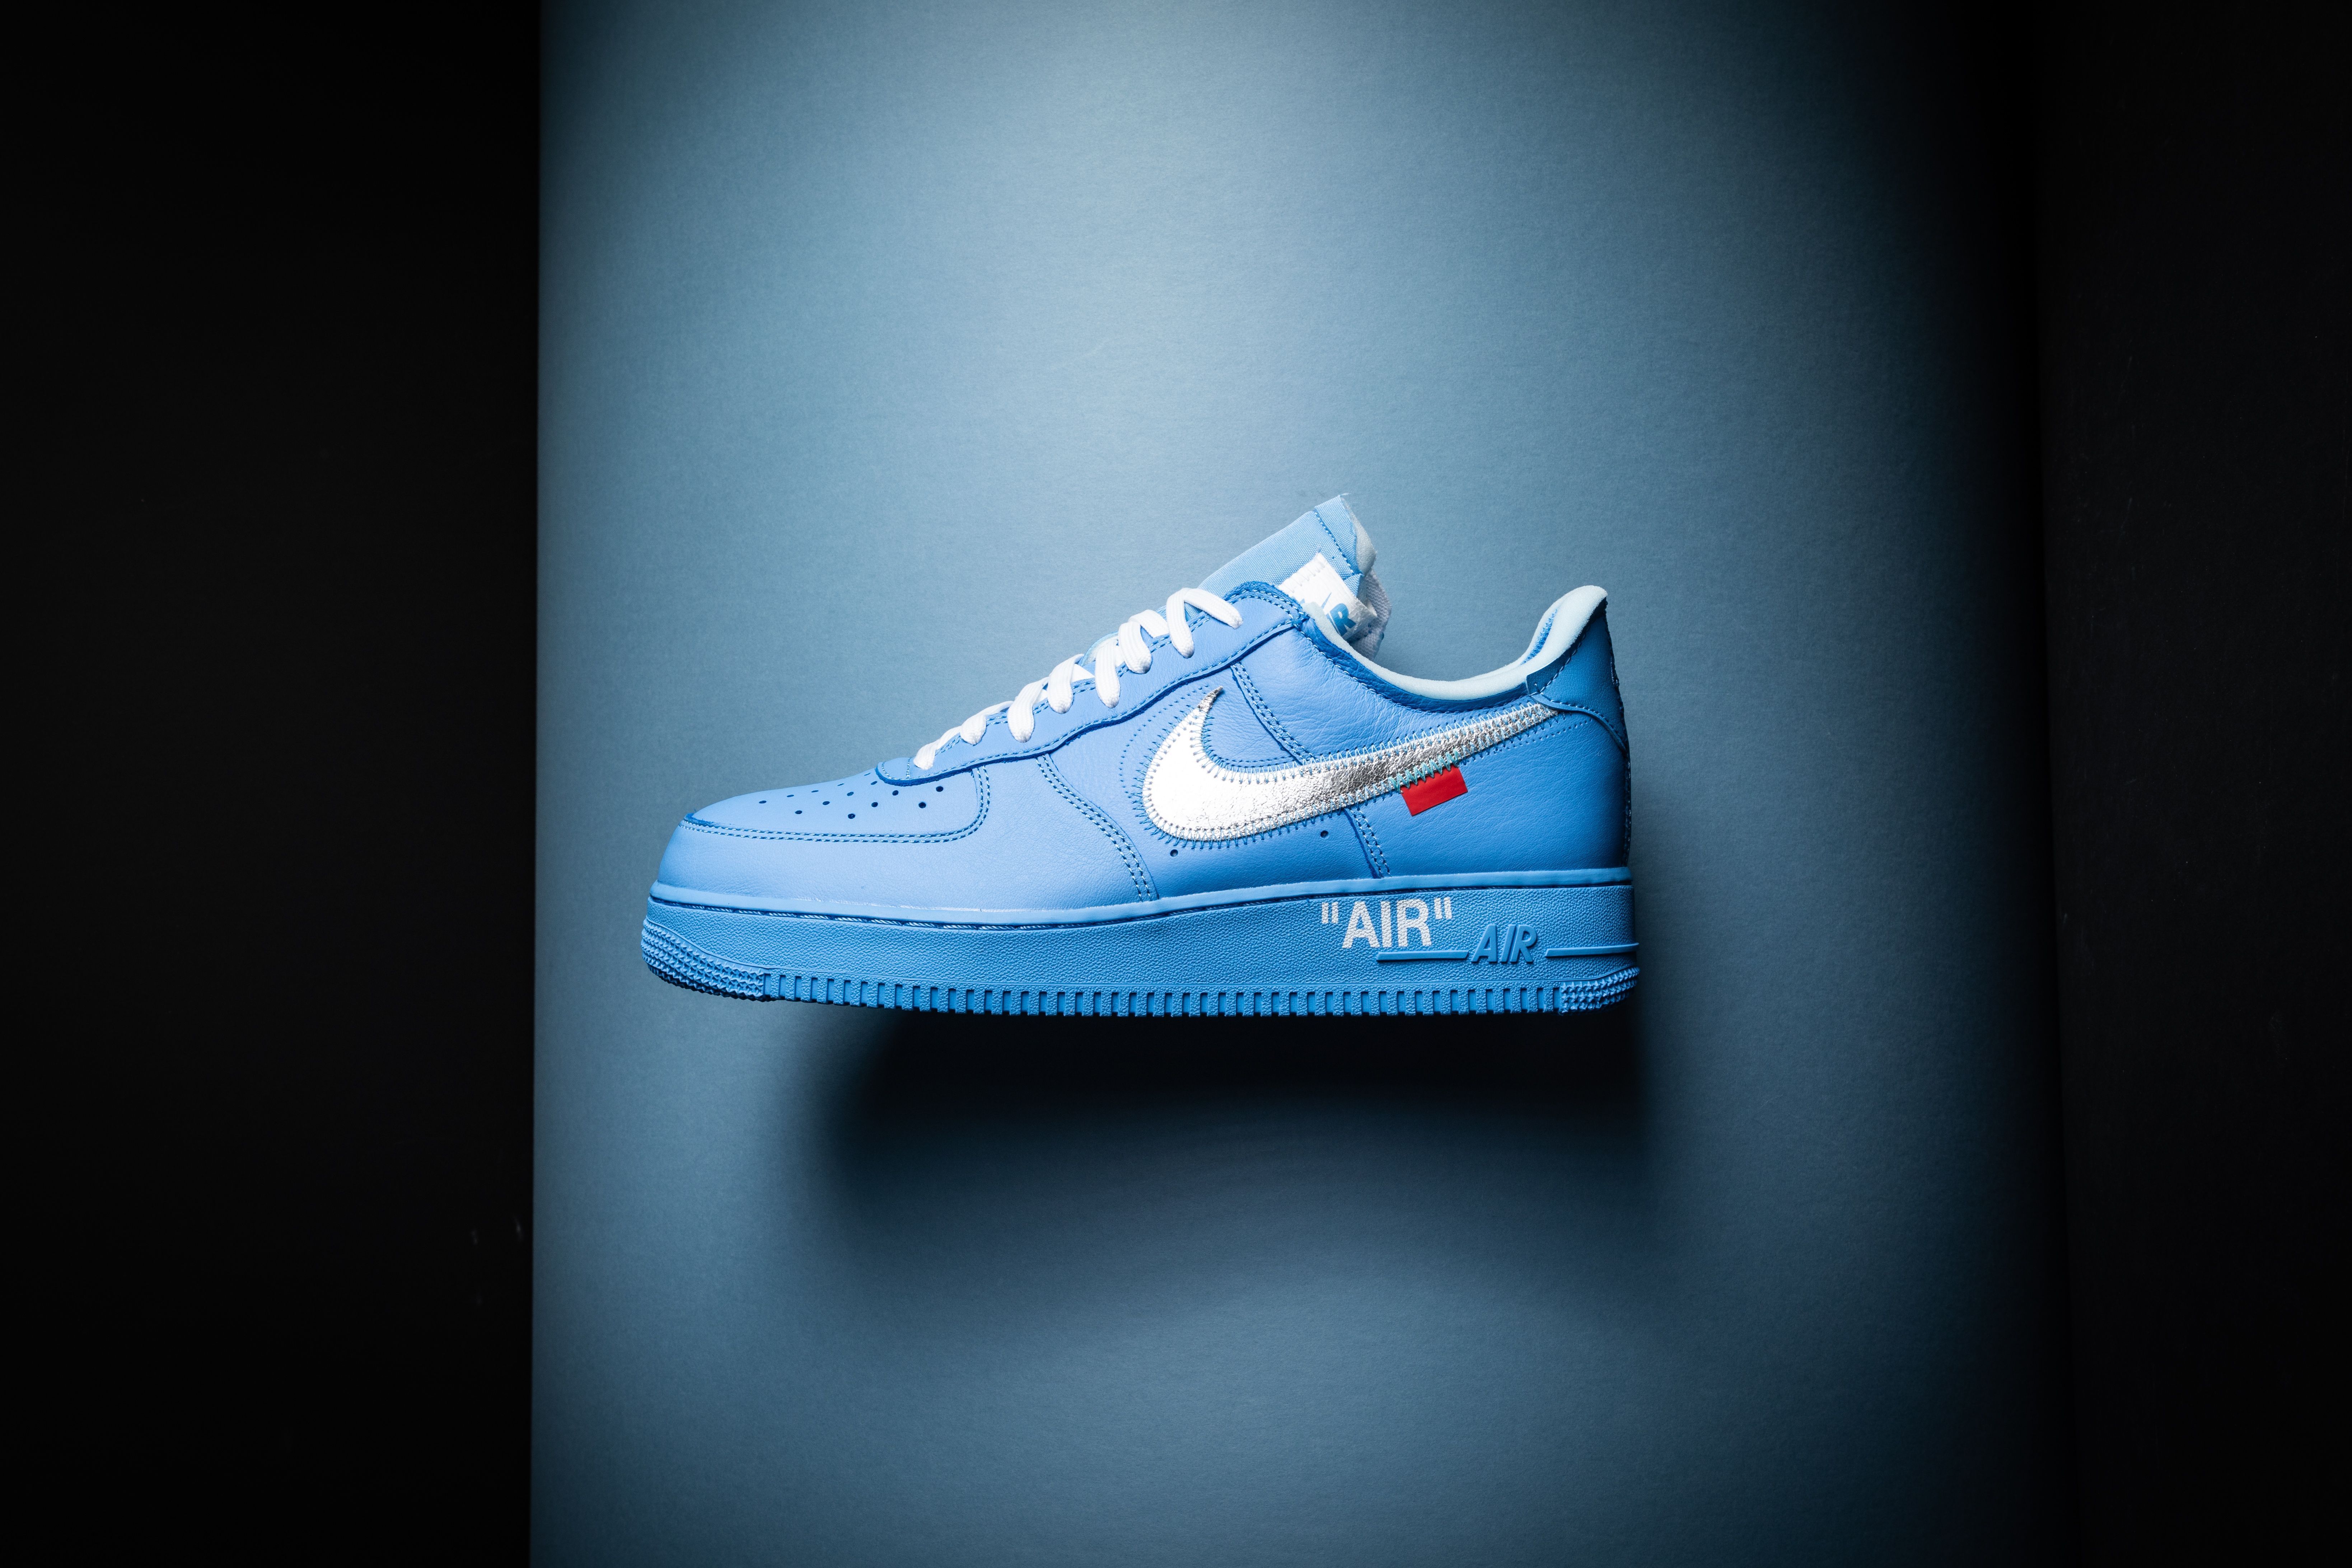 Nike Air Force 1 Low Off White 400. Sneakers Men Fashion, Summer Fashion Shoes, Nike Air Force